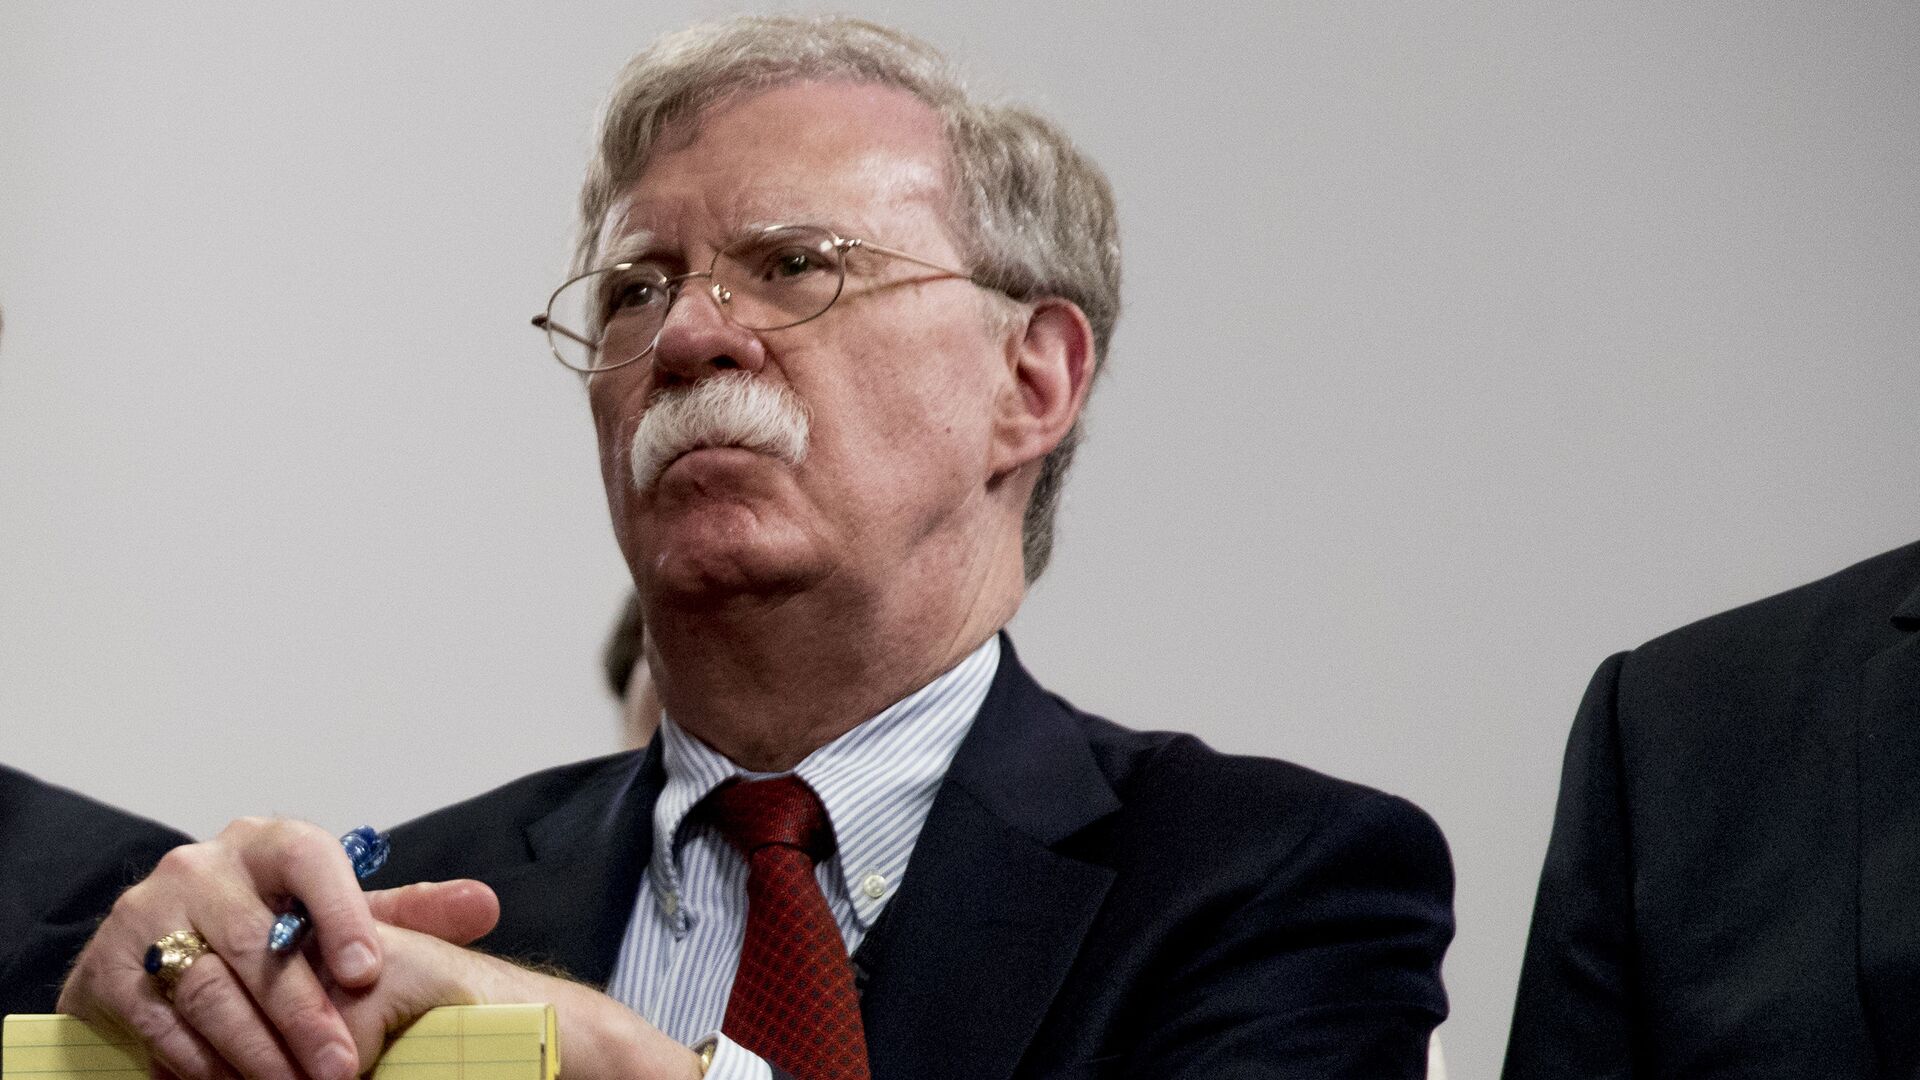 National Security Adviser John Bolton attends a meeting with President Donald Trump as he meets with Indian Prime Minister Narendra Modi at the G-7 summit in Biarritz, France, Monday, Aug. 26, 2019 - Sputnik International, 1920, 02.07.2021